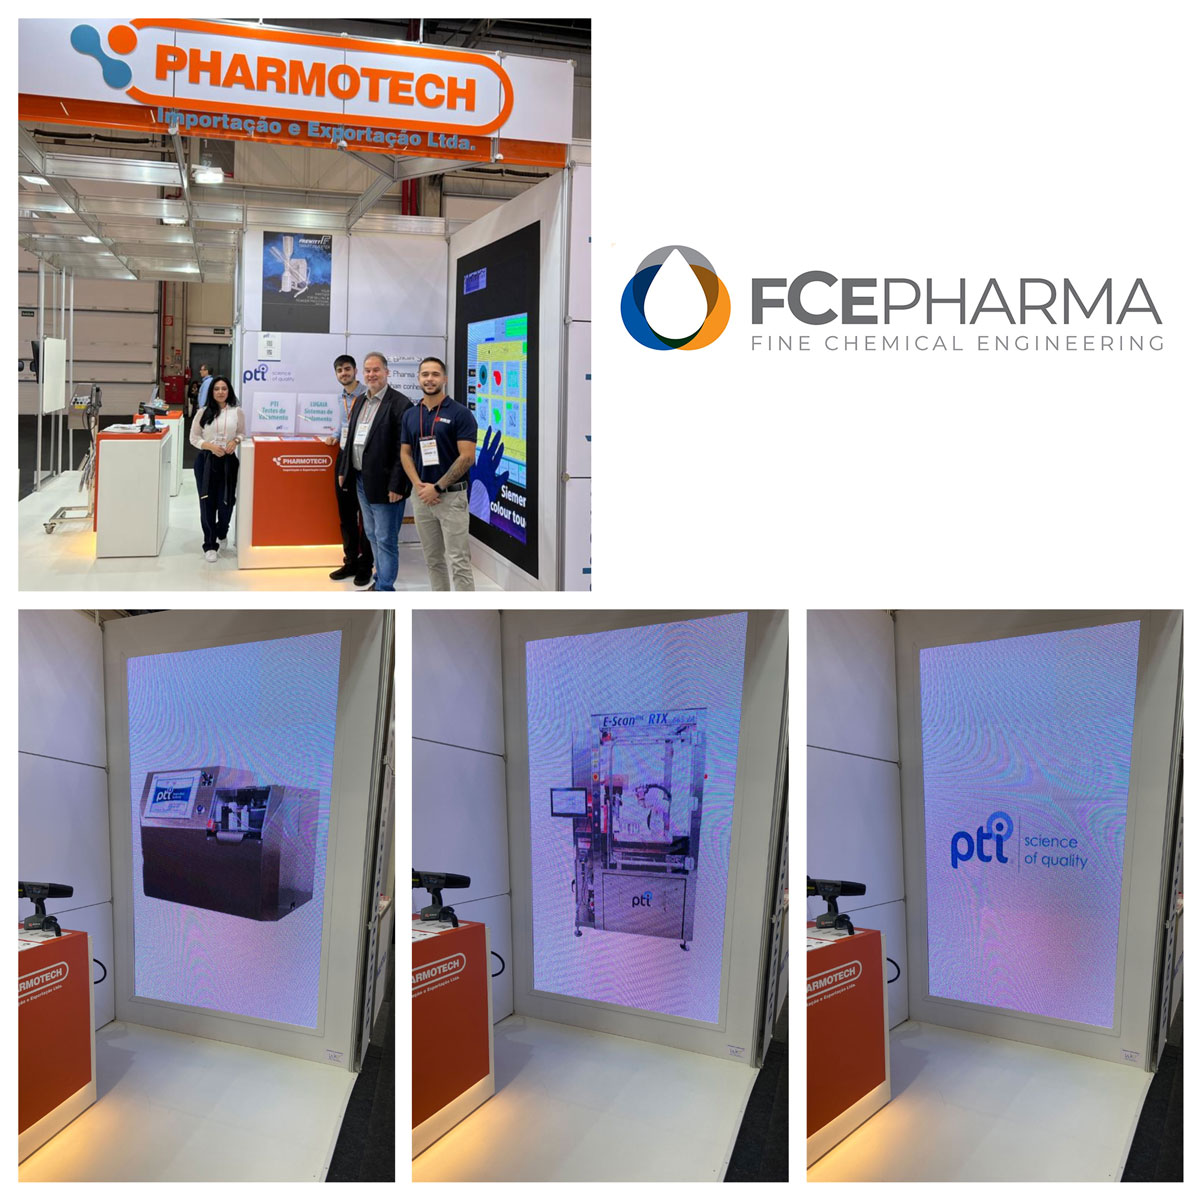 Pharmotech exhibited at the FCE exhibition in Sao Paulo